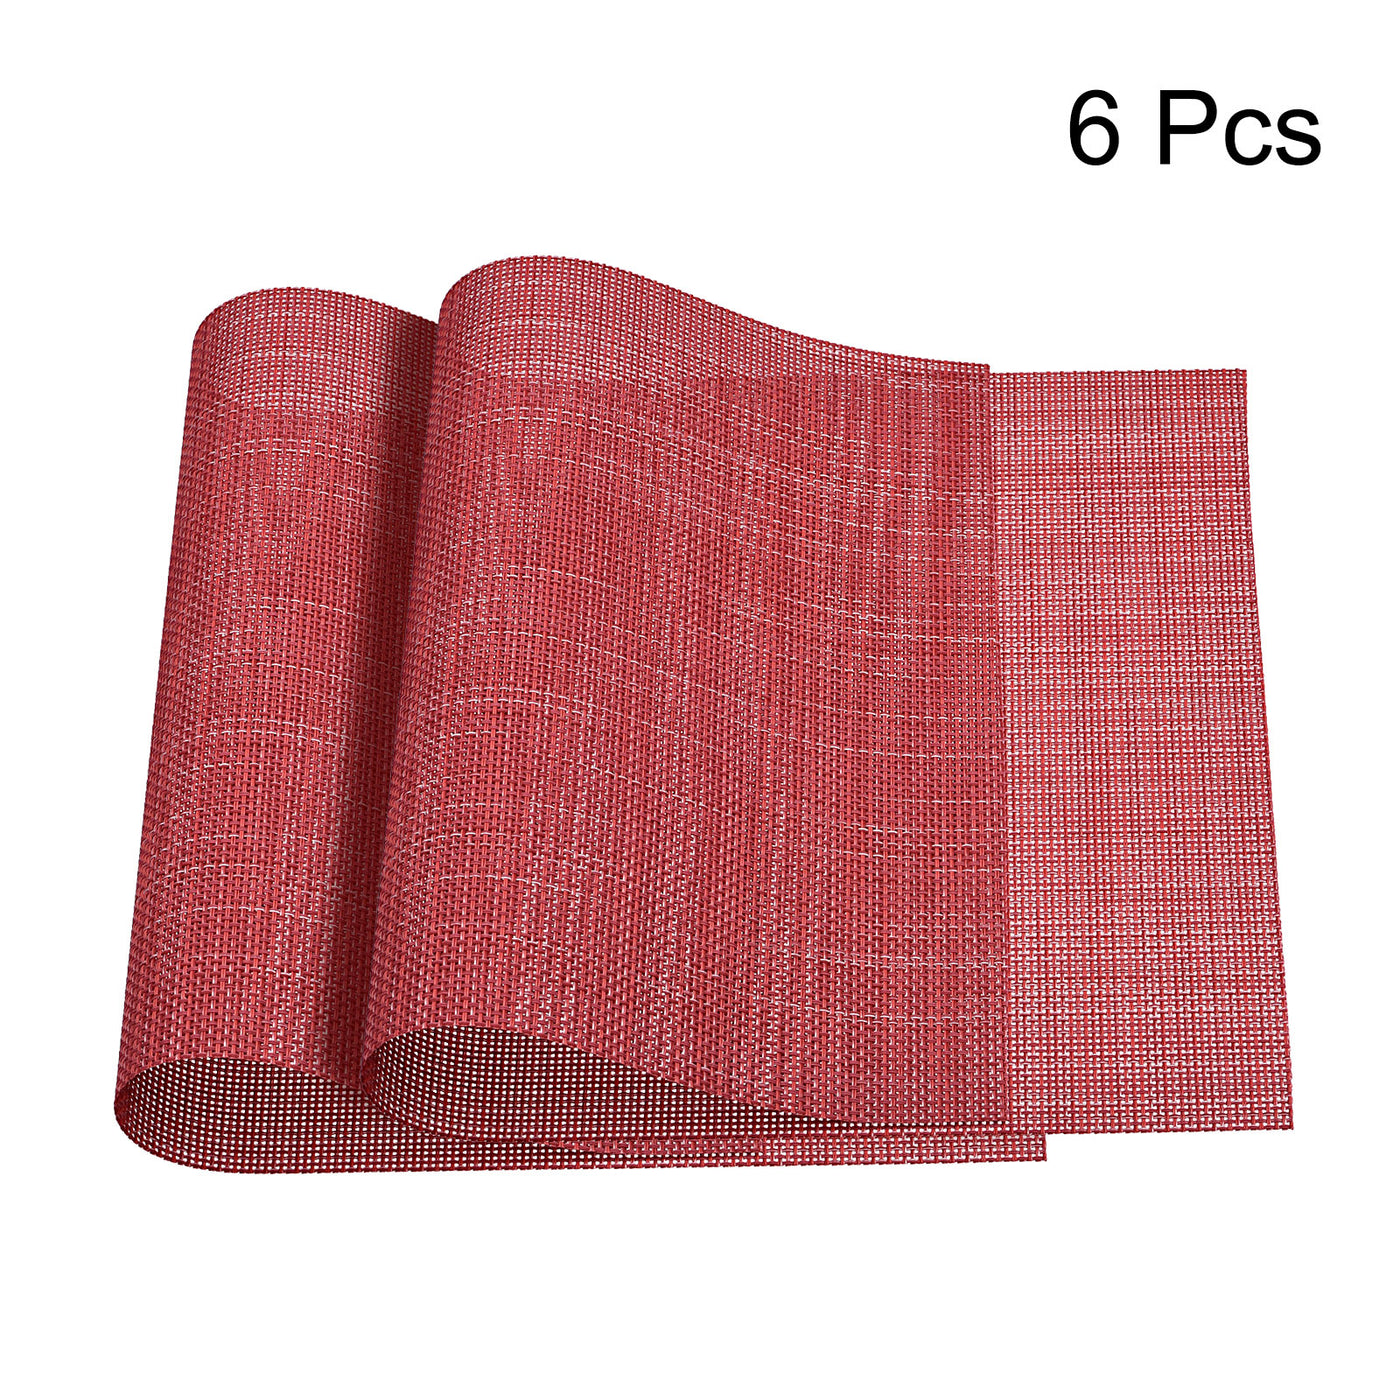 uxcell Uxcell Place Mats, 450x300mm Table Mats Set of 6 PVC Washable Woven Placemat Red